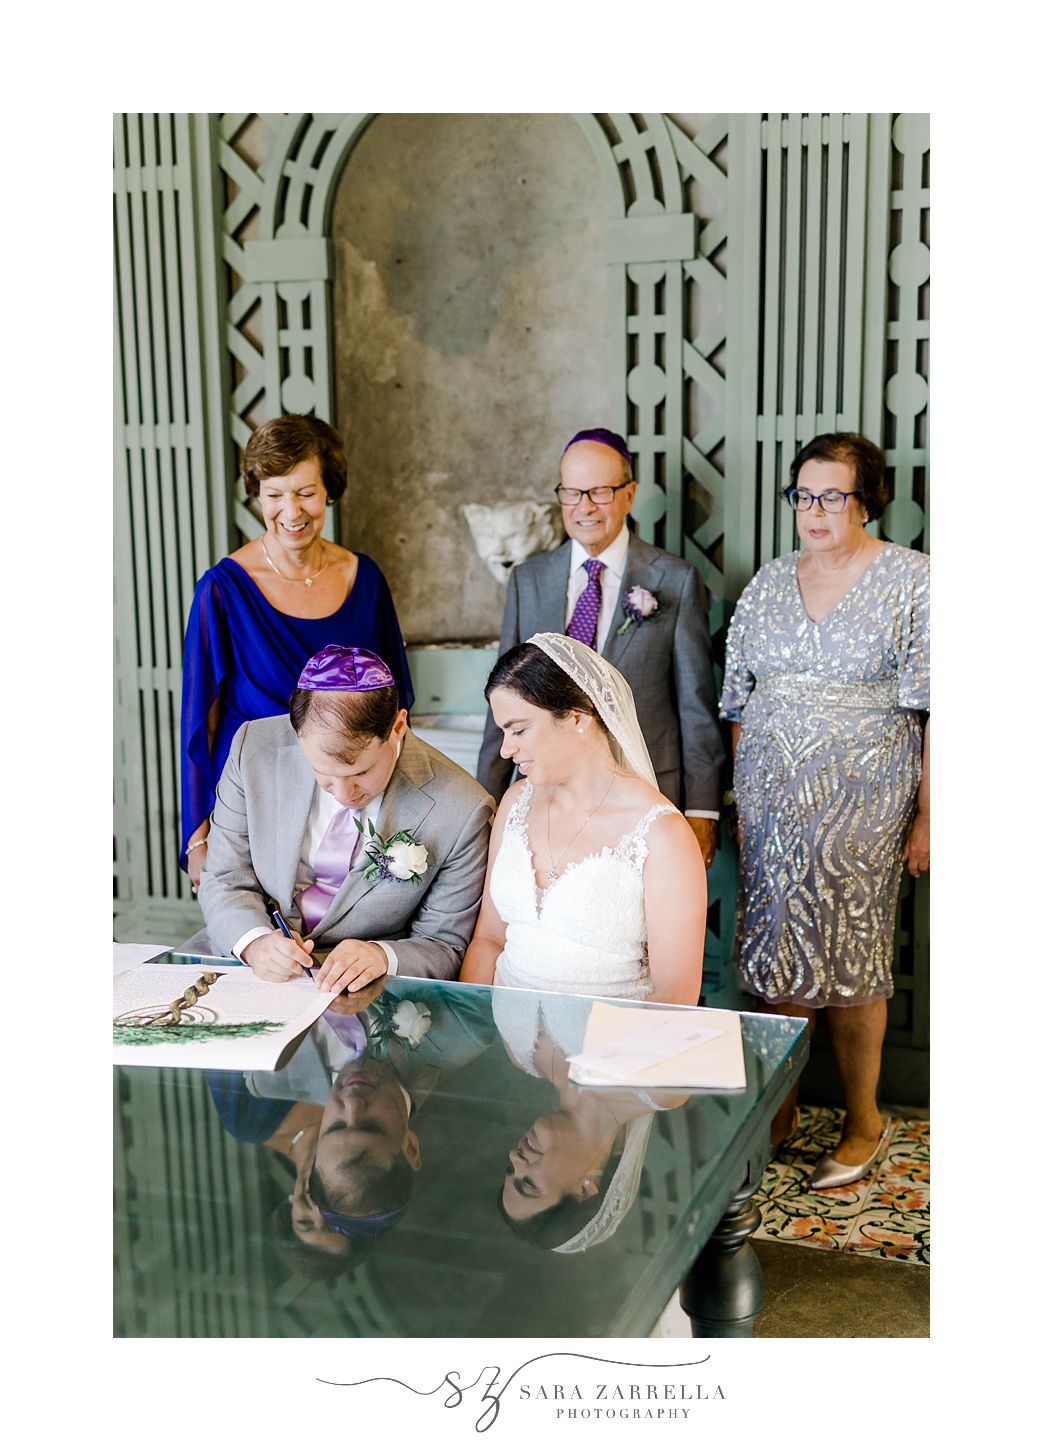 newlyweds sit at table to sign Ketubah with parents behind them at Blithewold Mansion